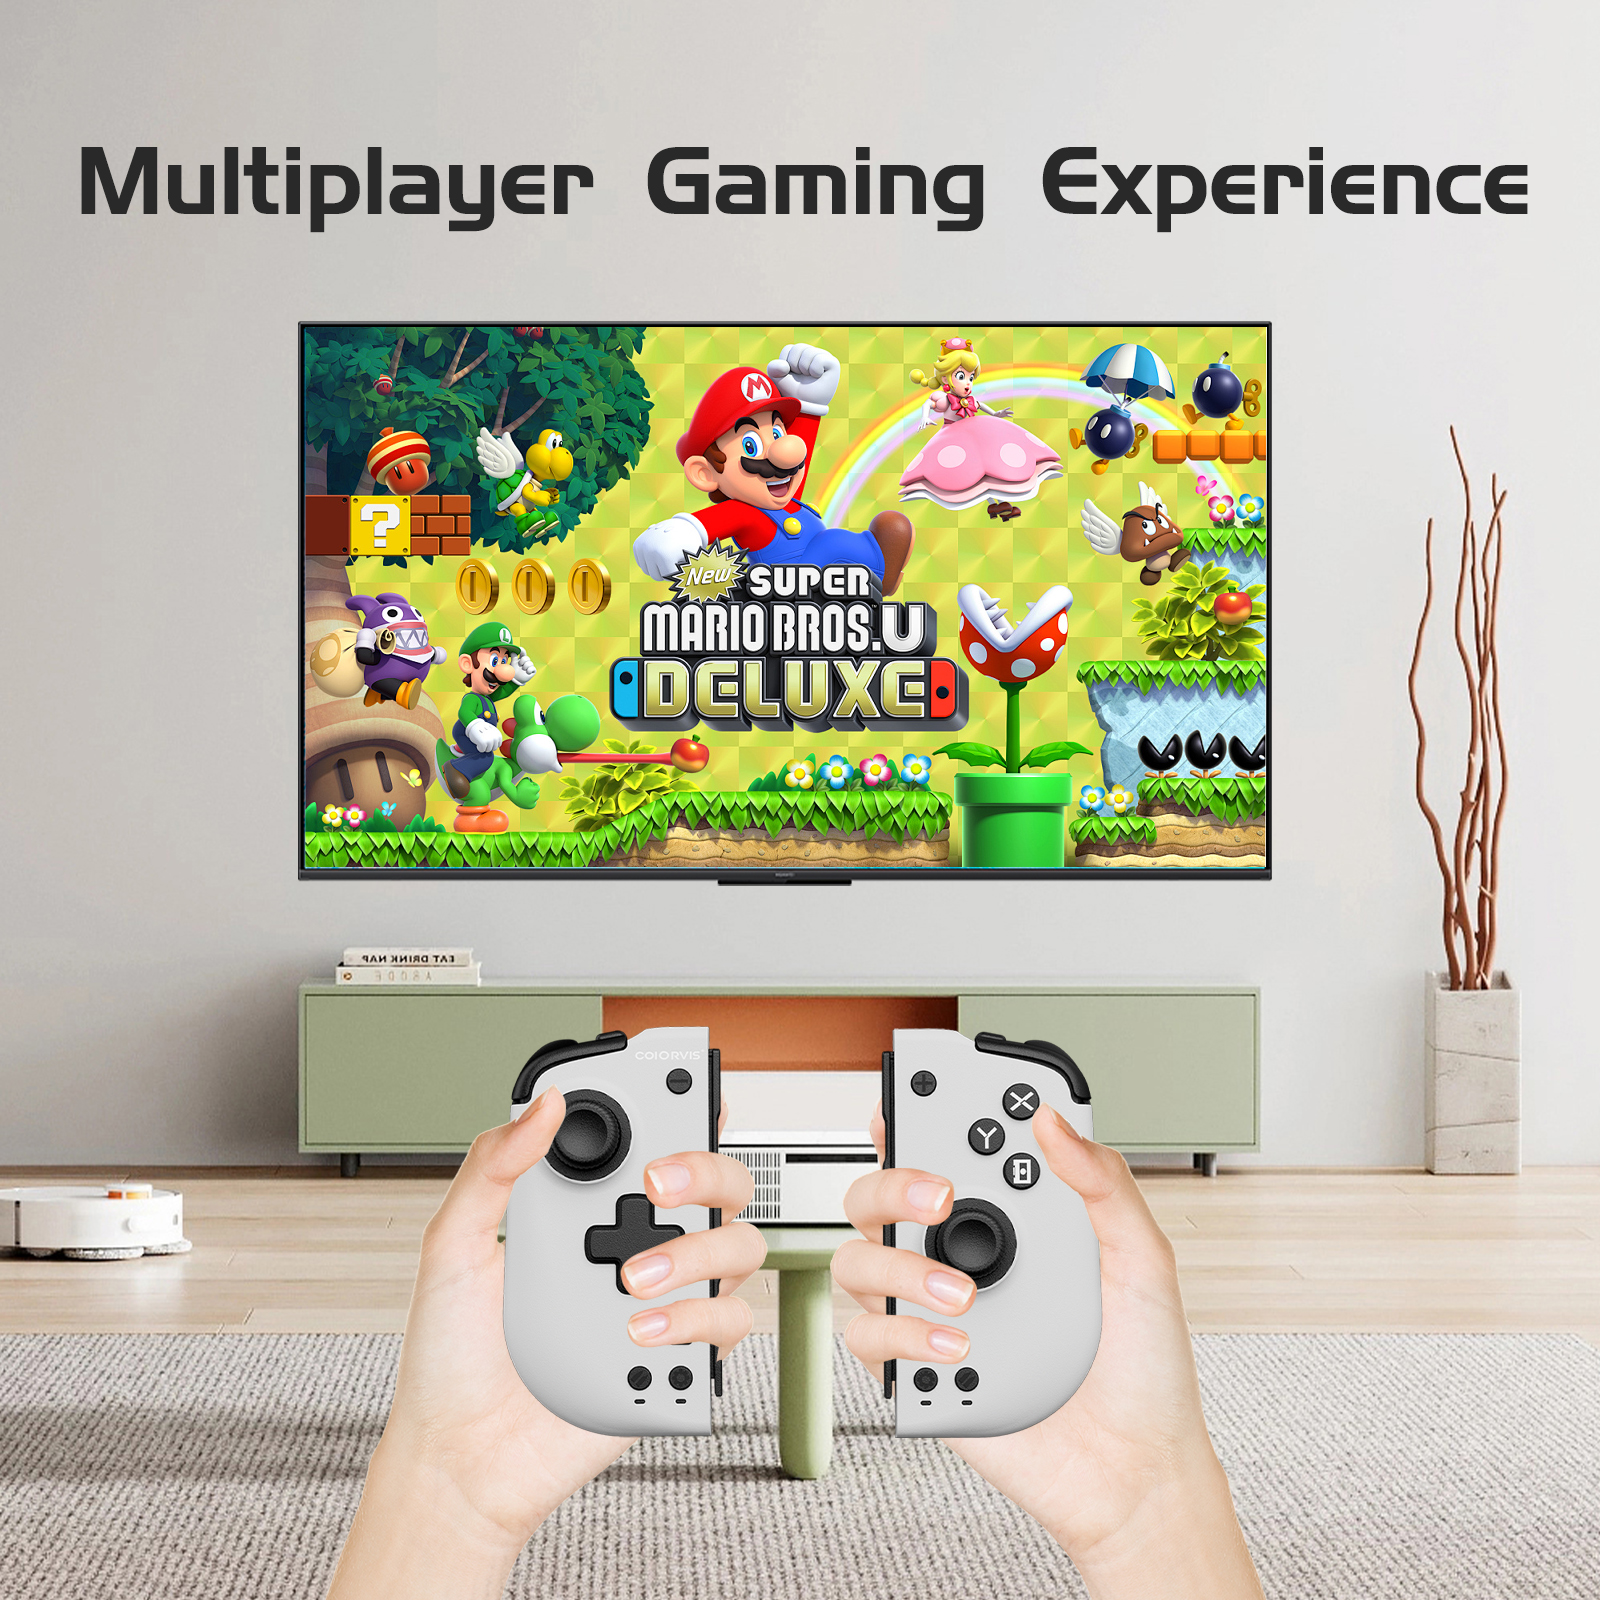 Multiplayer Games Experience.